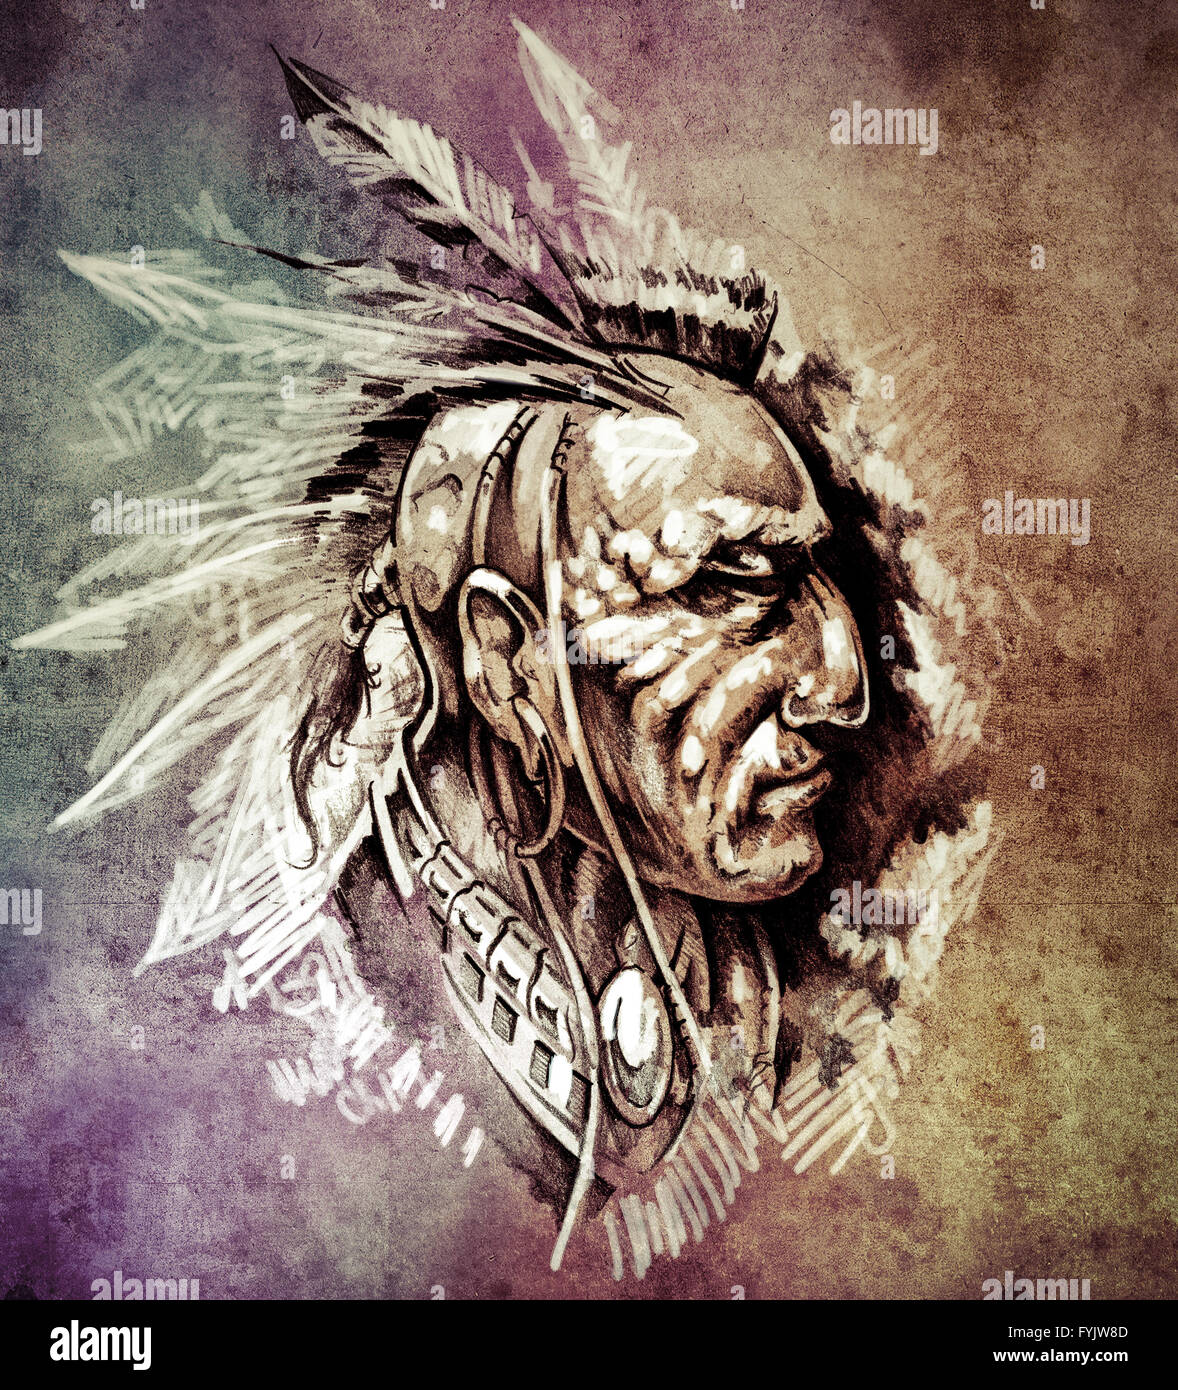 Sketch of tattoo art, American Indian Chief illustration over co Stock  Illustration by ©outsiderzone #9942596